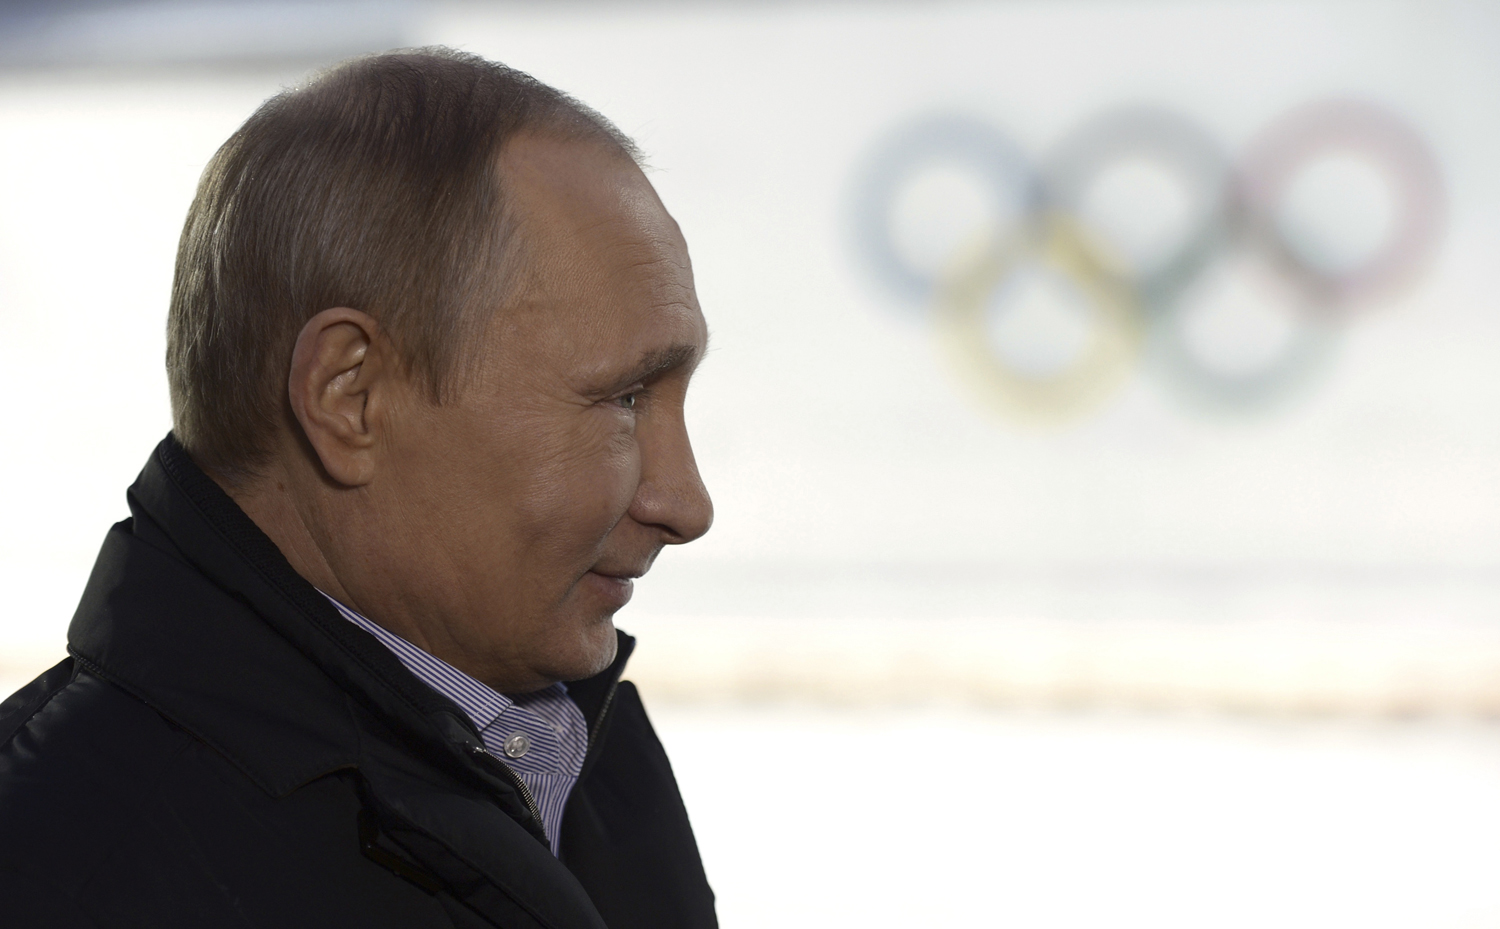 Russian President Putin listens to a journalist's question during a televised news conference in Sochi